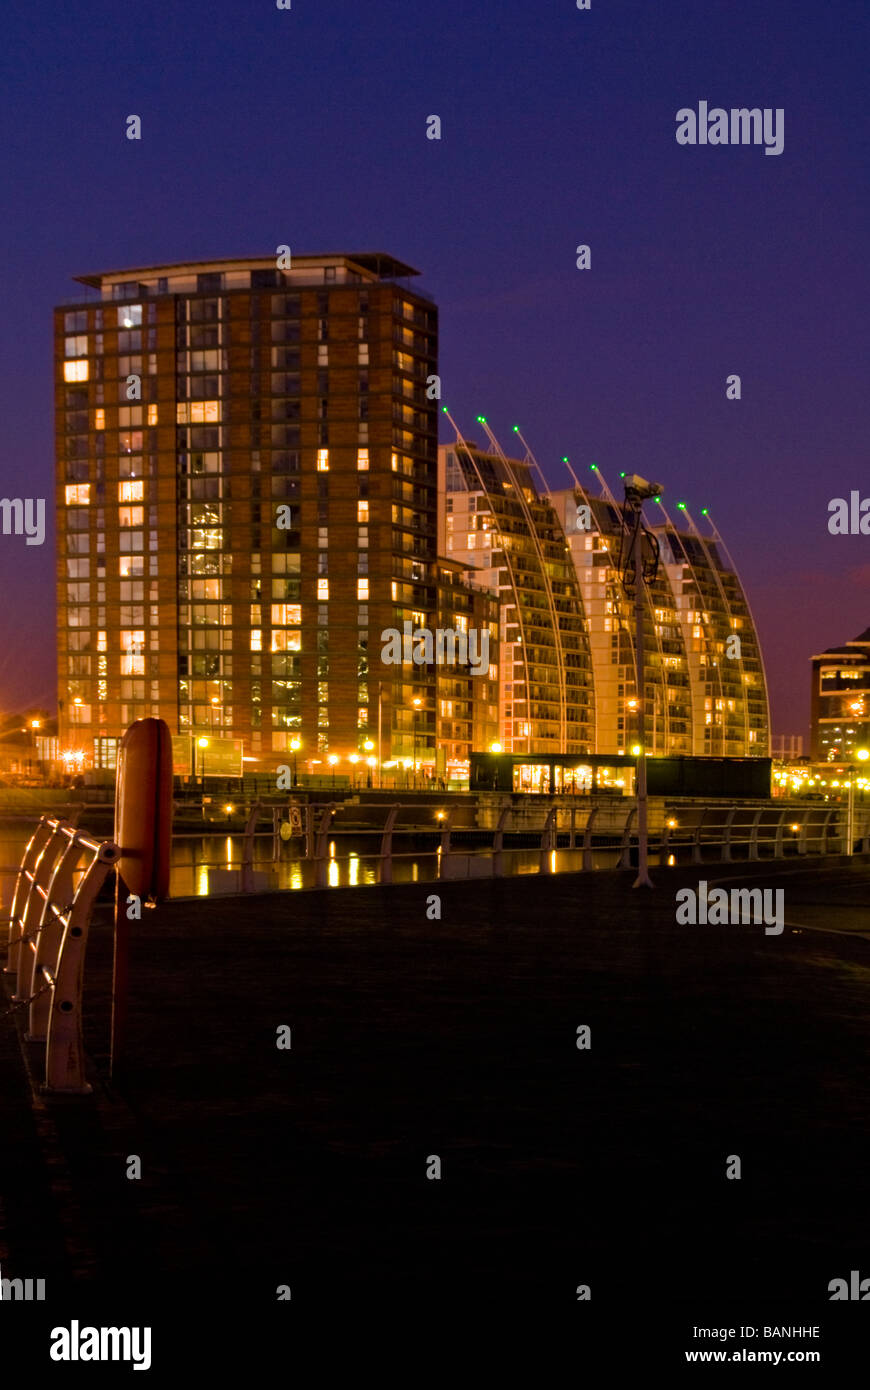 Apartments and NV Buildings at night, Salford Quays, Manchester, England, UK Stock Photo